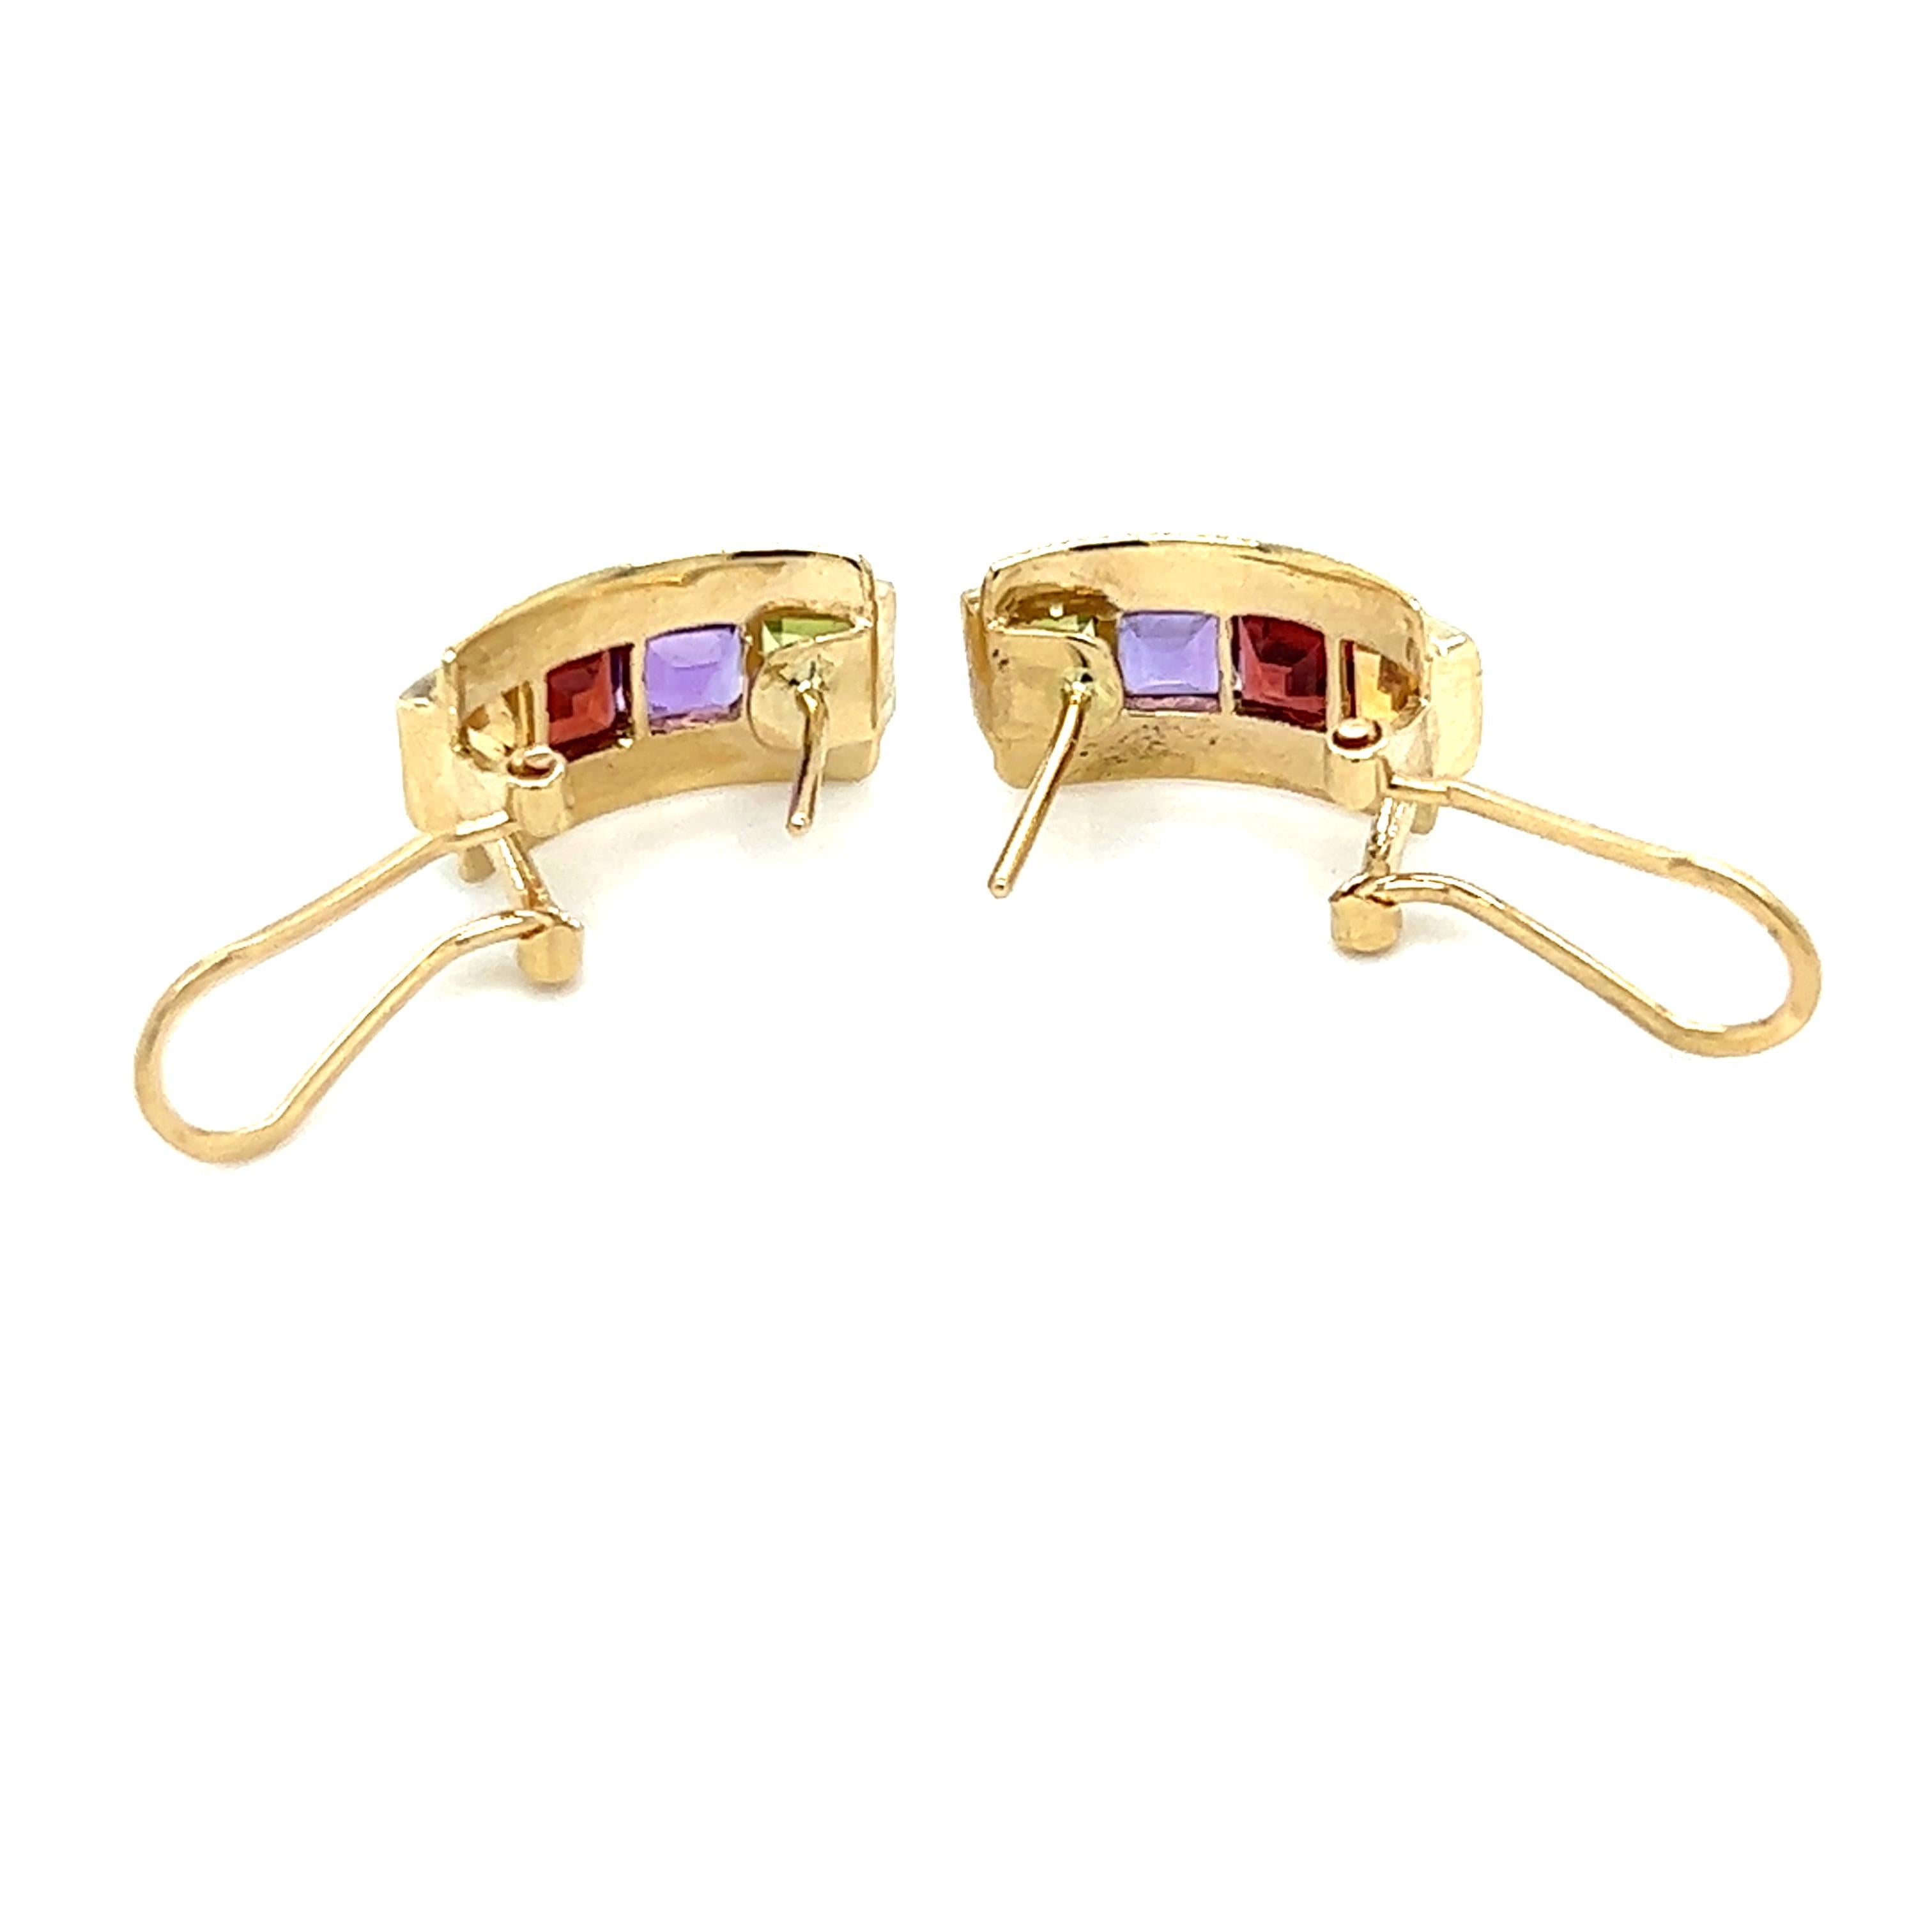 Contemporary Peridot, Amethyst, Garnet, and Citrine Earrings in 14k Yellow Gold